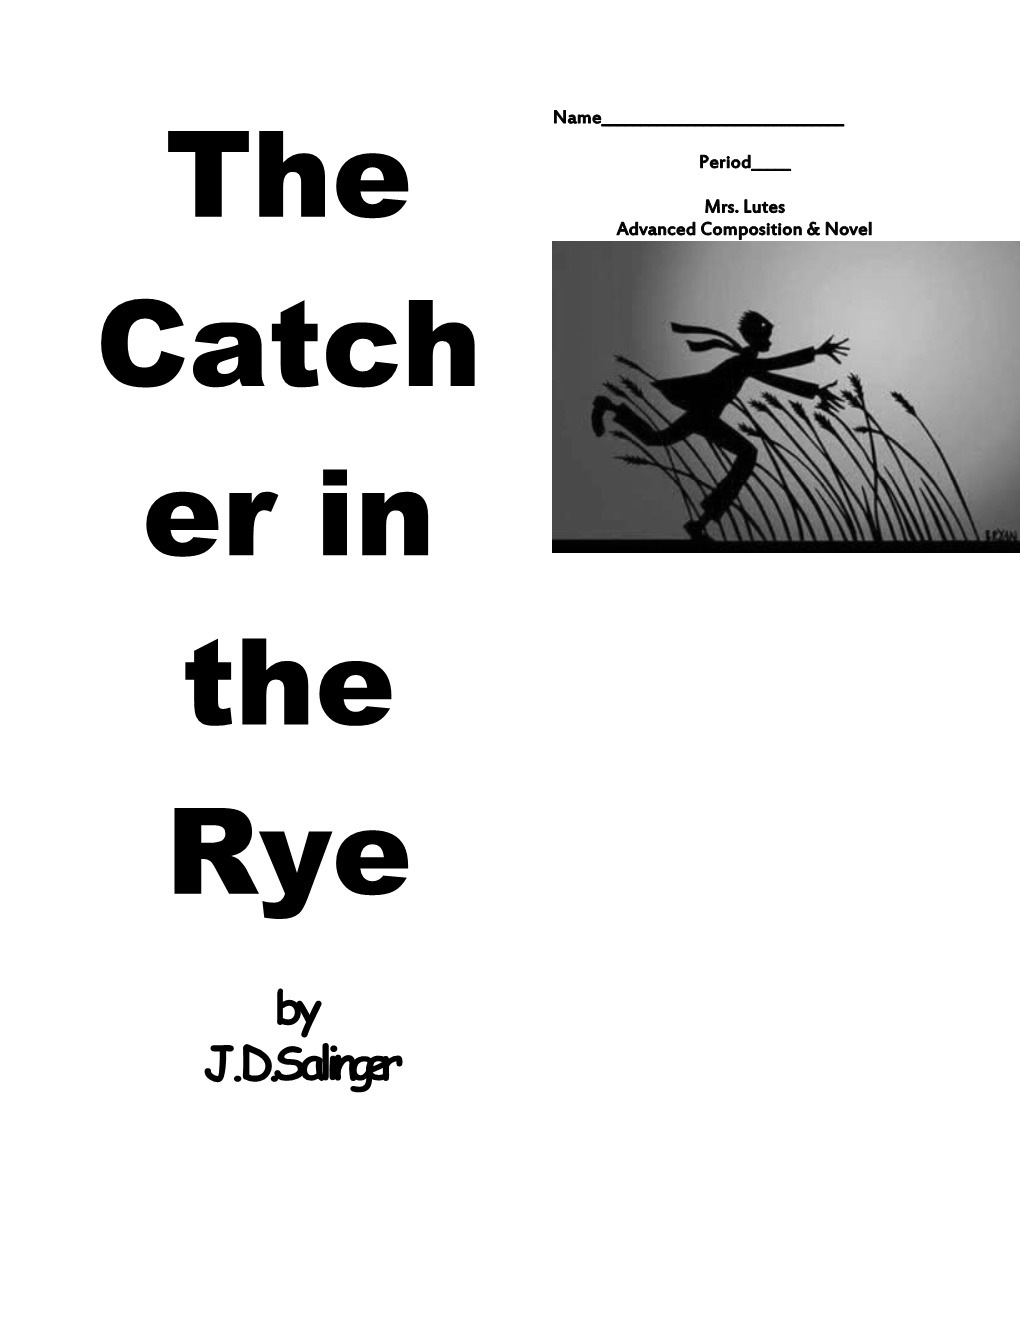 The Catcher in the Rye s1